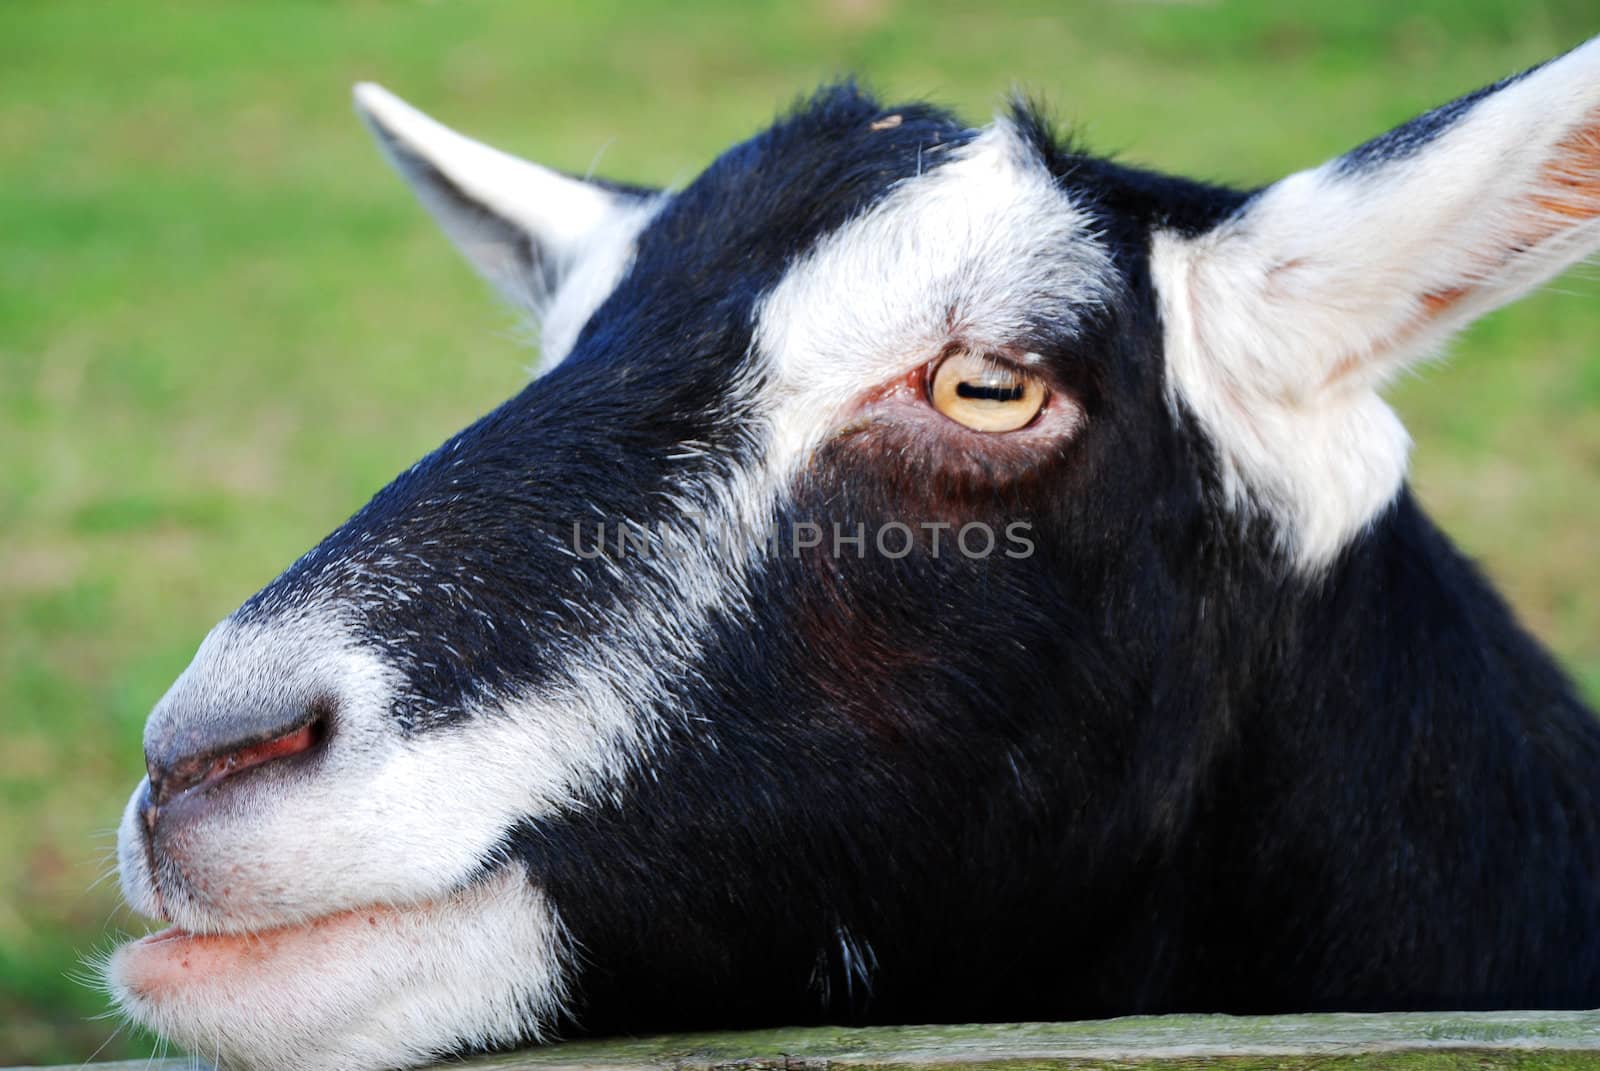 Black and White Goat by pwillitts